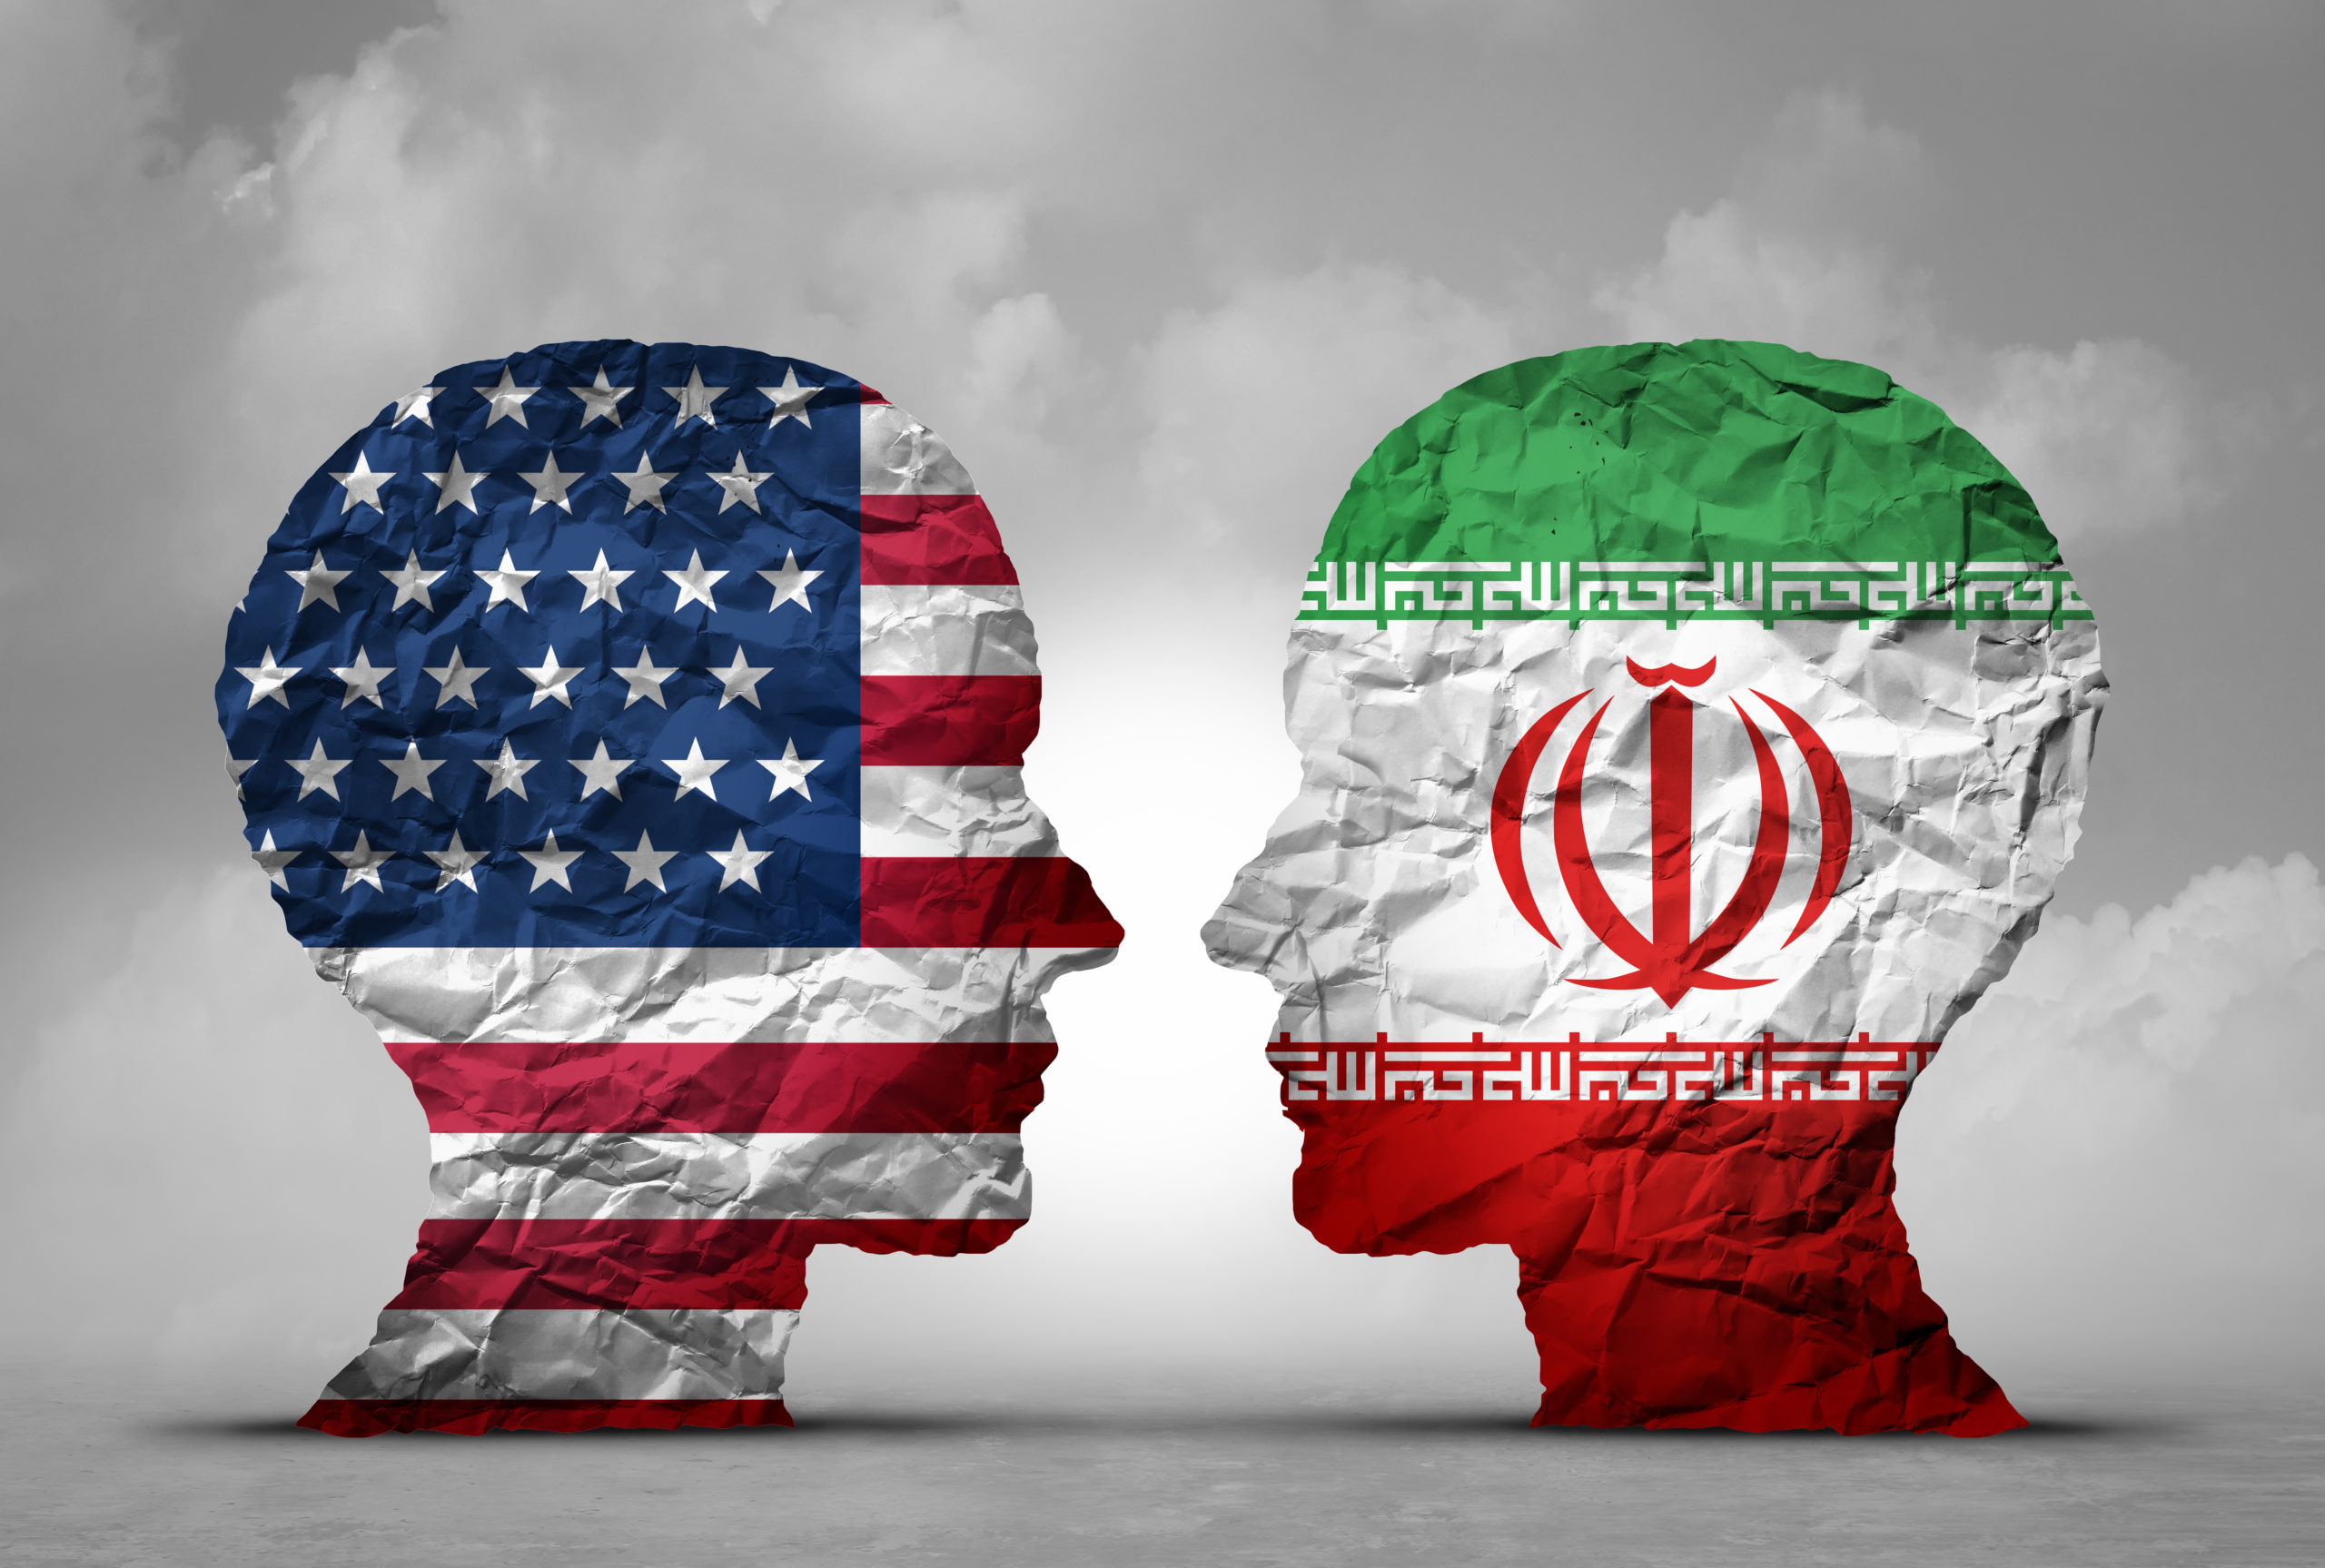 Reciprocity and Coercion: Ending the Downturn in U.S.-Iran Relations